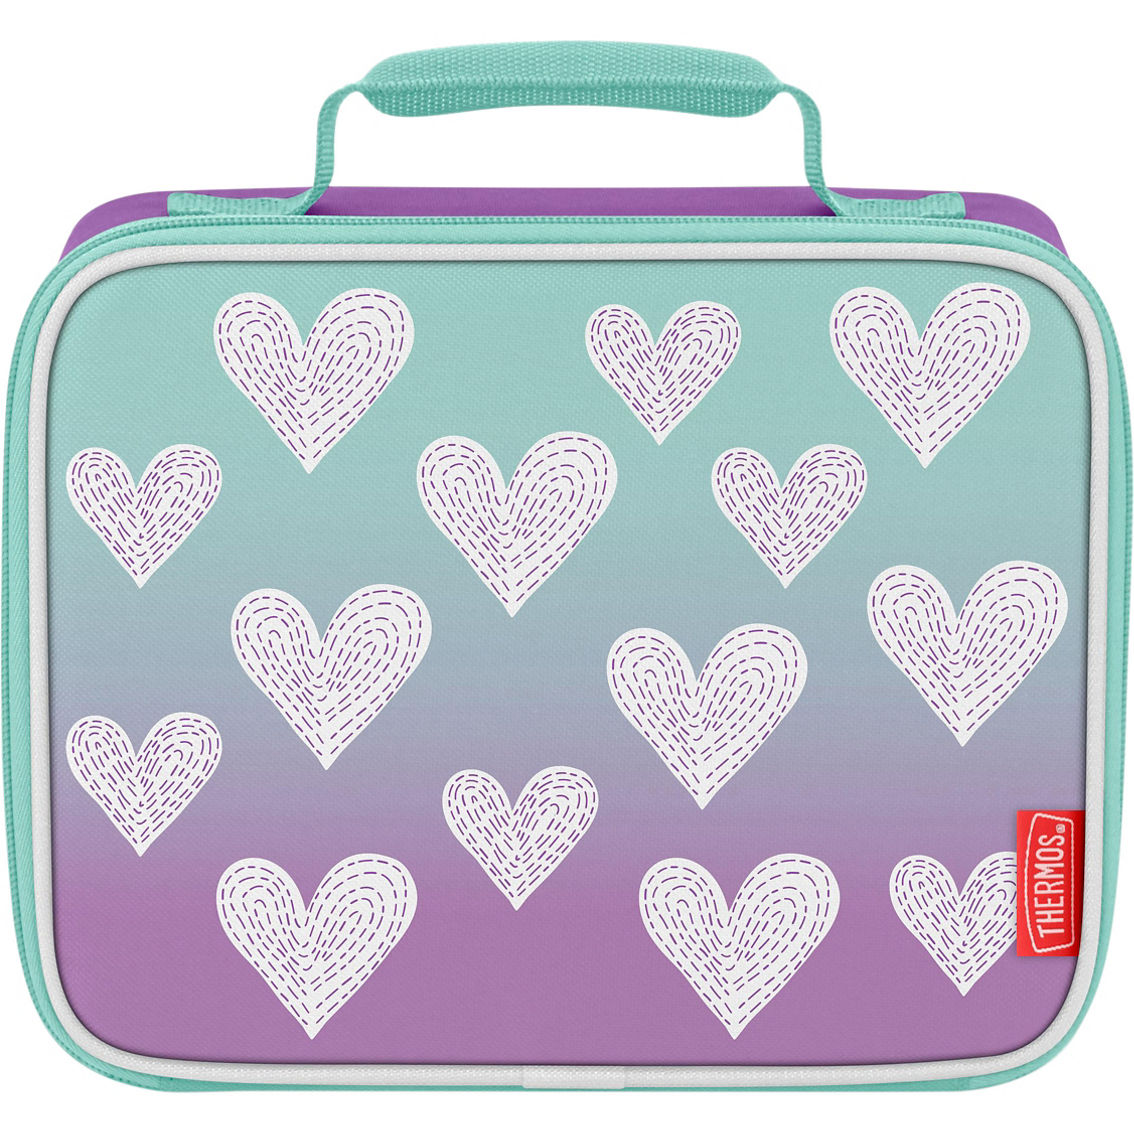 Thermos Purple Hearts Lunch Kit - Image 1 of 3